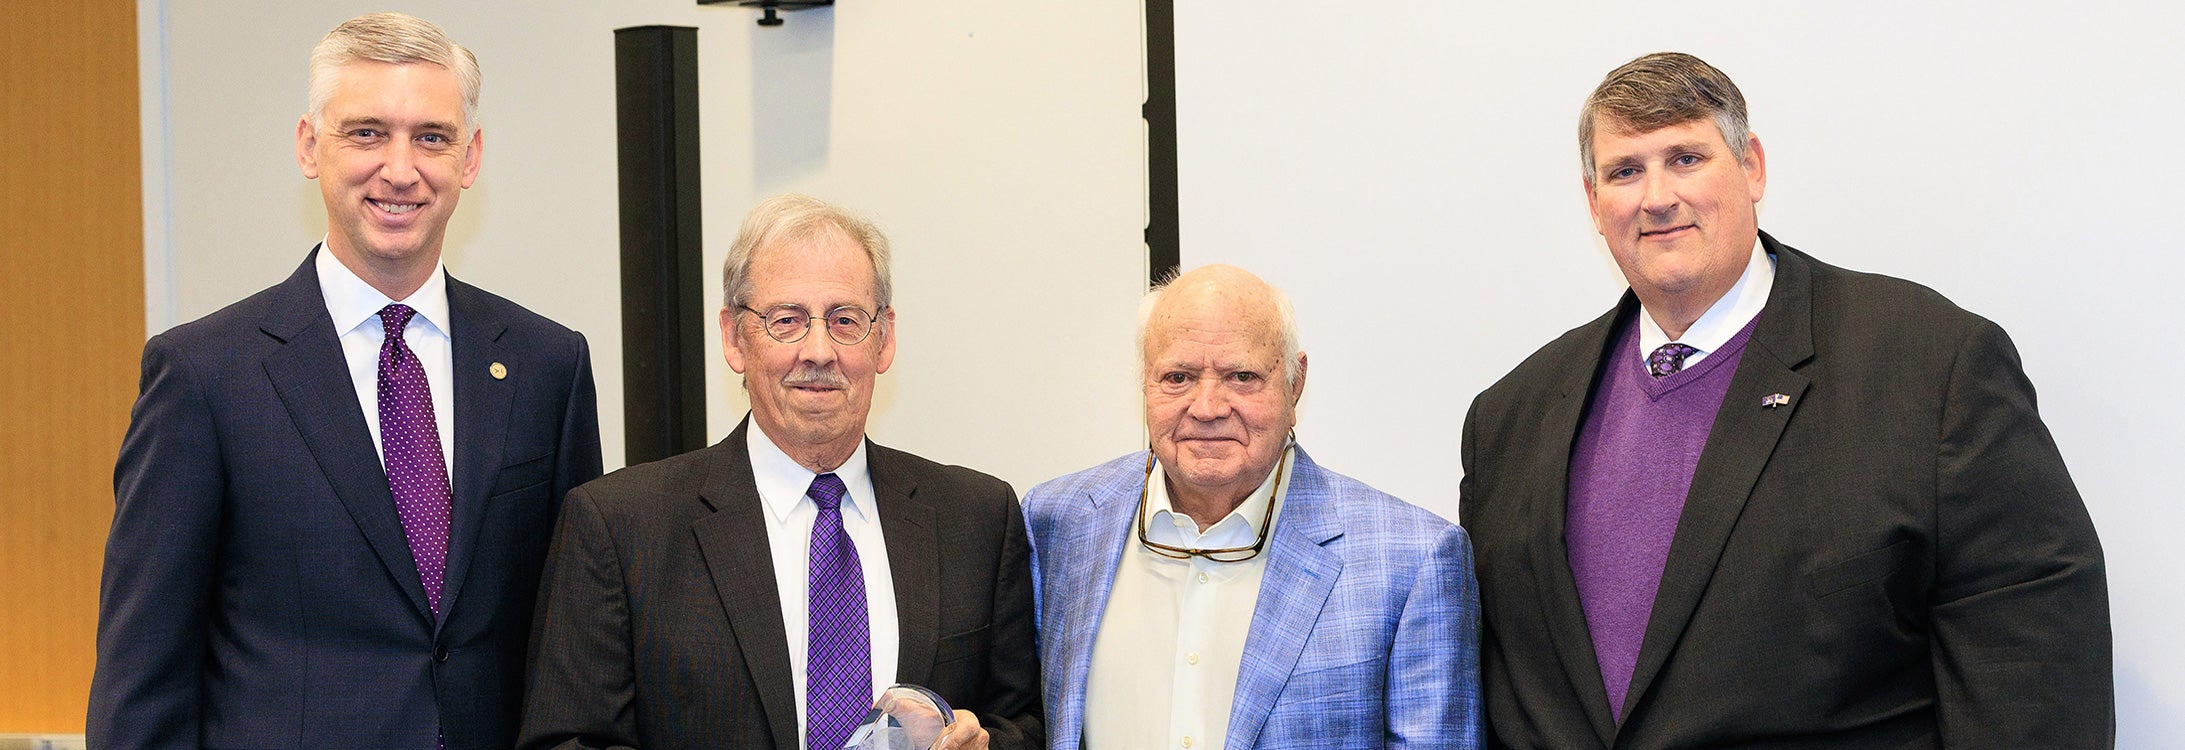 Chancellor Philip Rogers, left, and ECU Board of Trustees chairman Jason Poole, right, honor Jim Westmoreland and Bill Clark, in middle left to right, with the first Trustees Award for Distinction. (Photos by Rhett Butler)